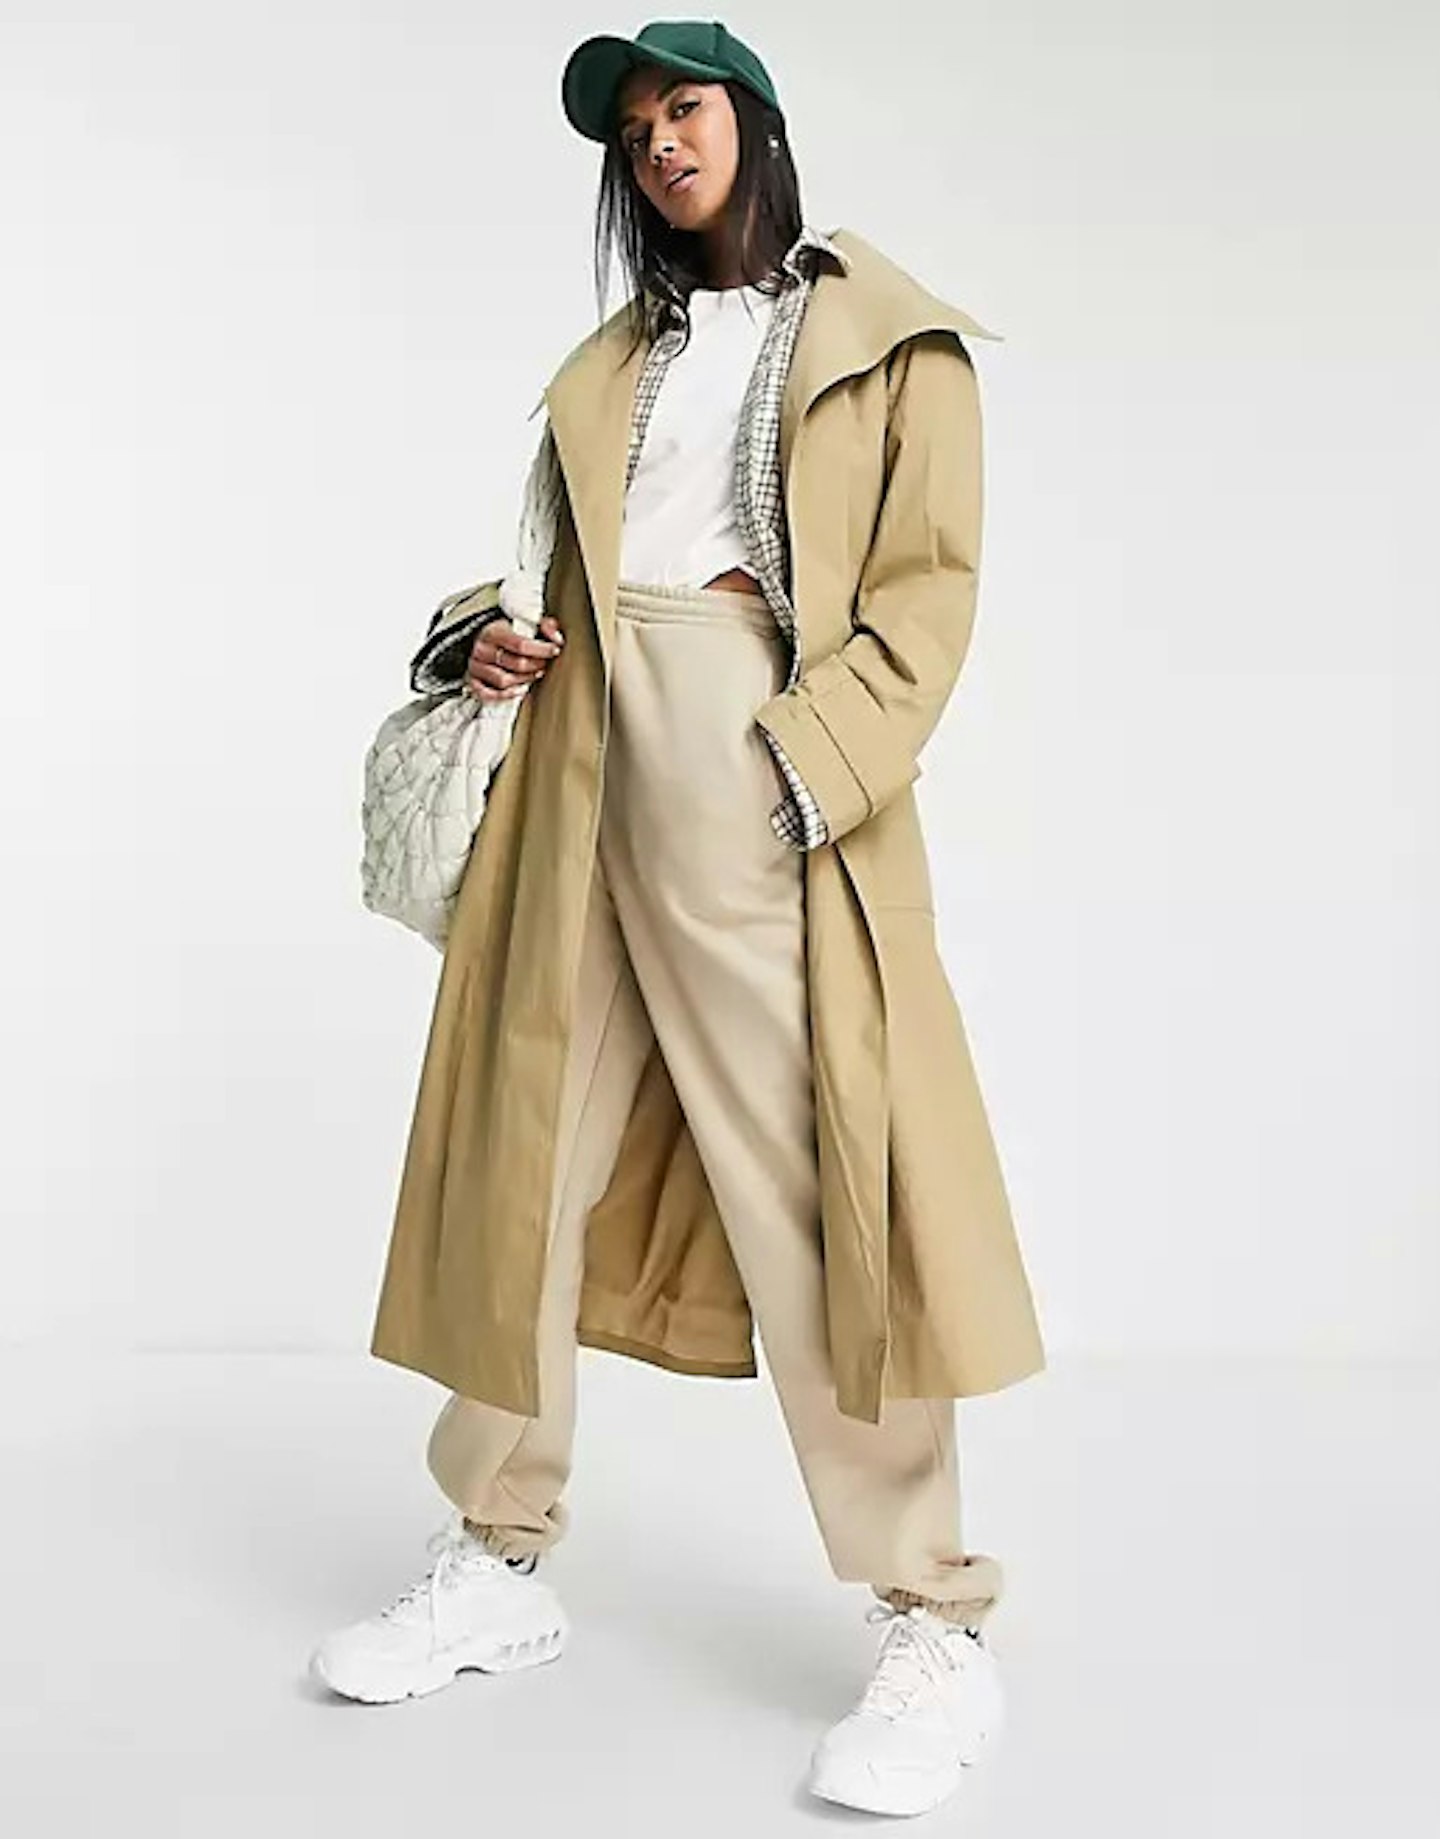 ASOS Design, collared luxe trench coat in stone, WAS £70 NOW £56